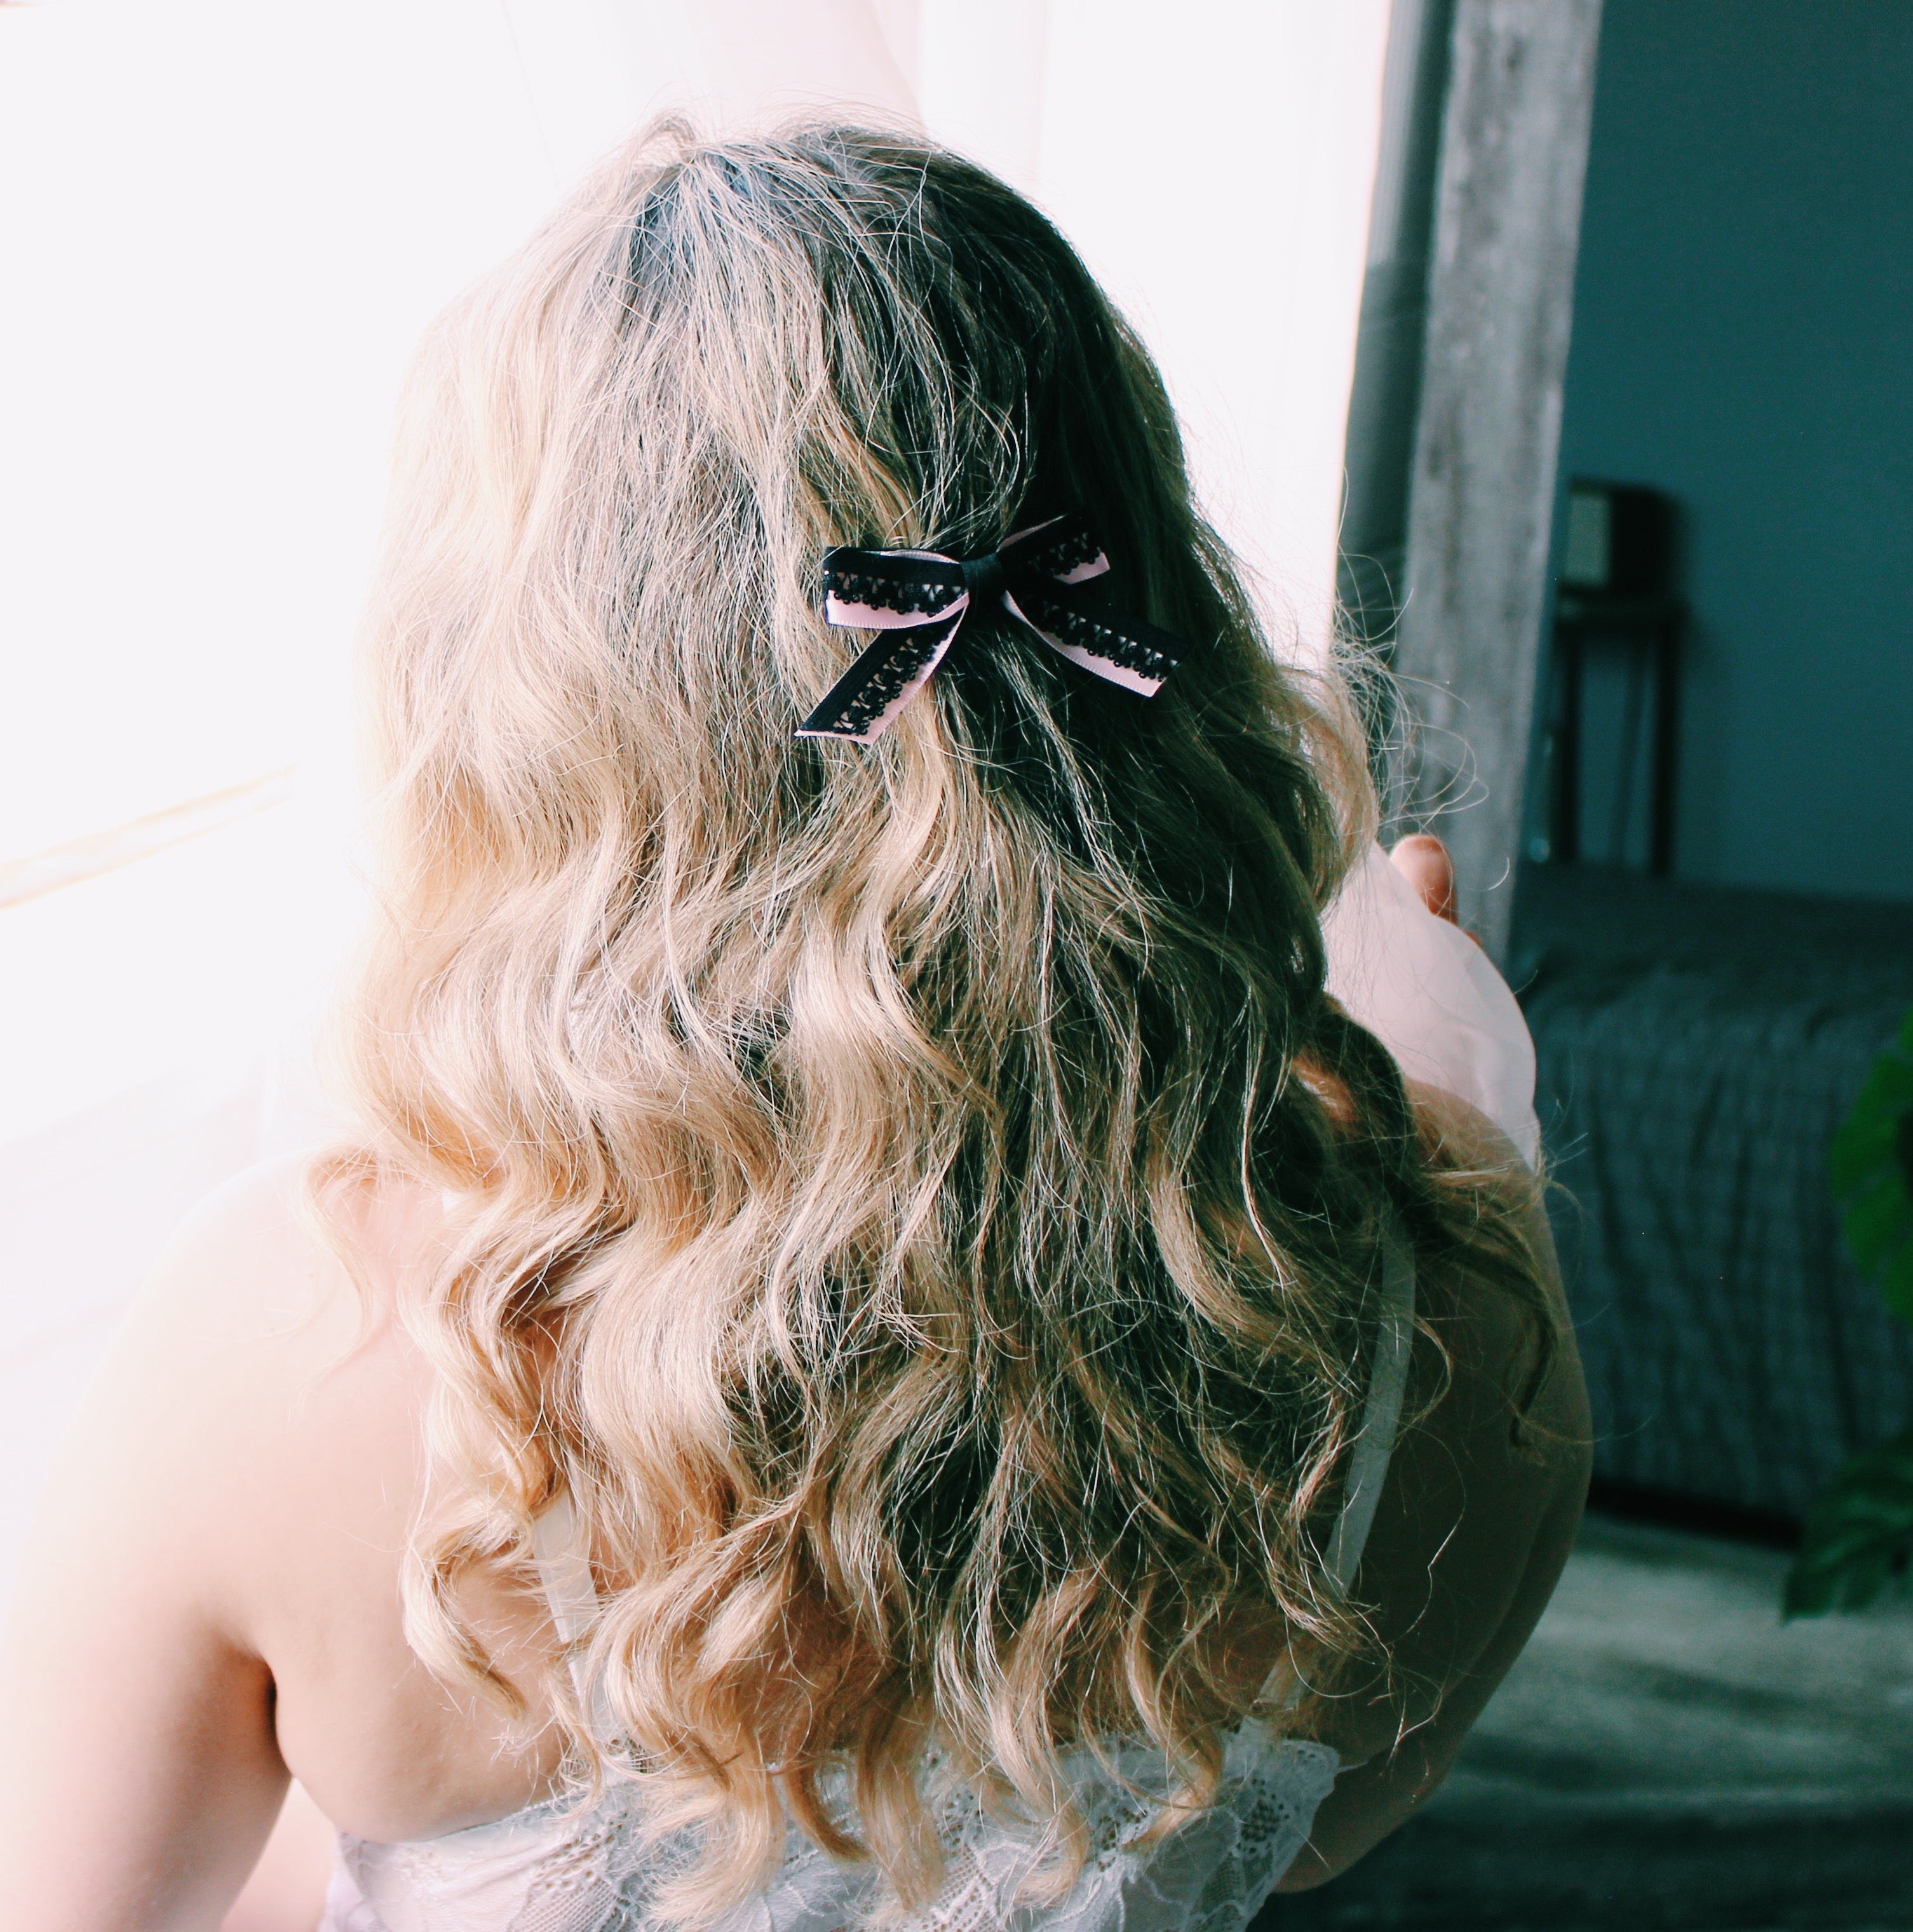 Blonde Plus Size Model Wearing Black and Pink Hair Bow